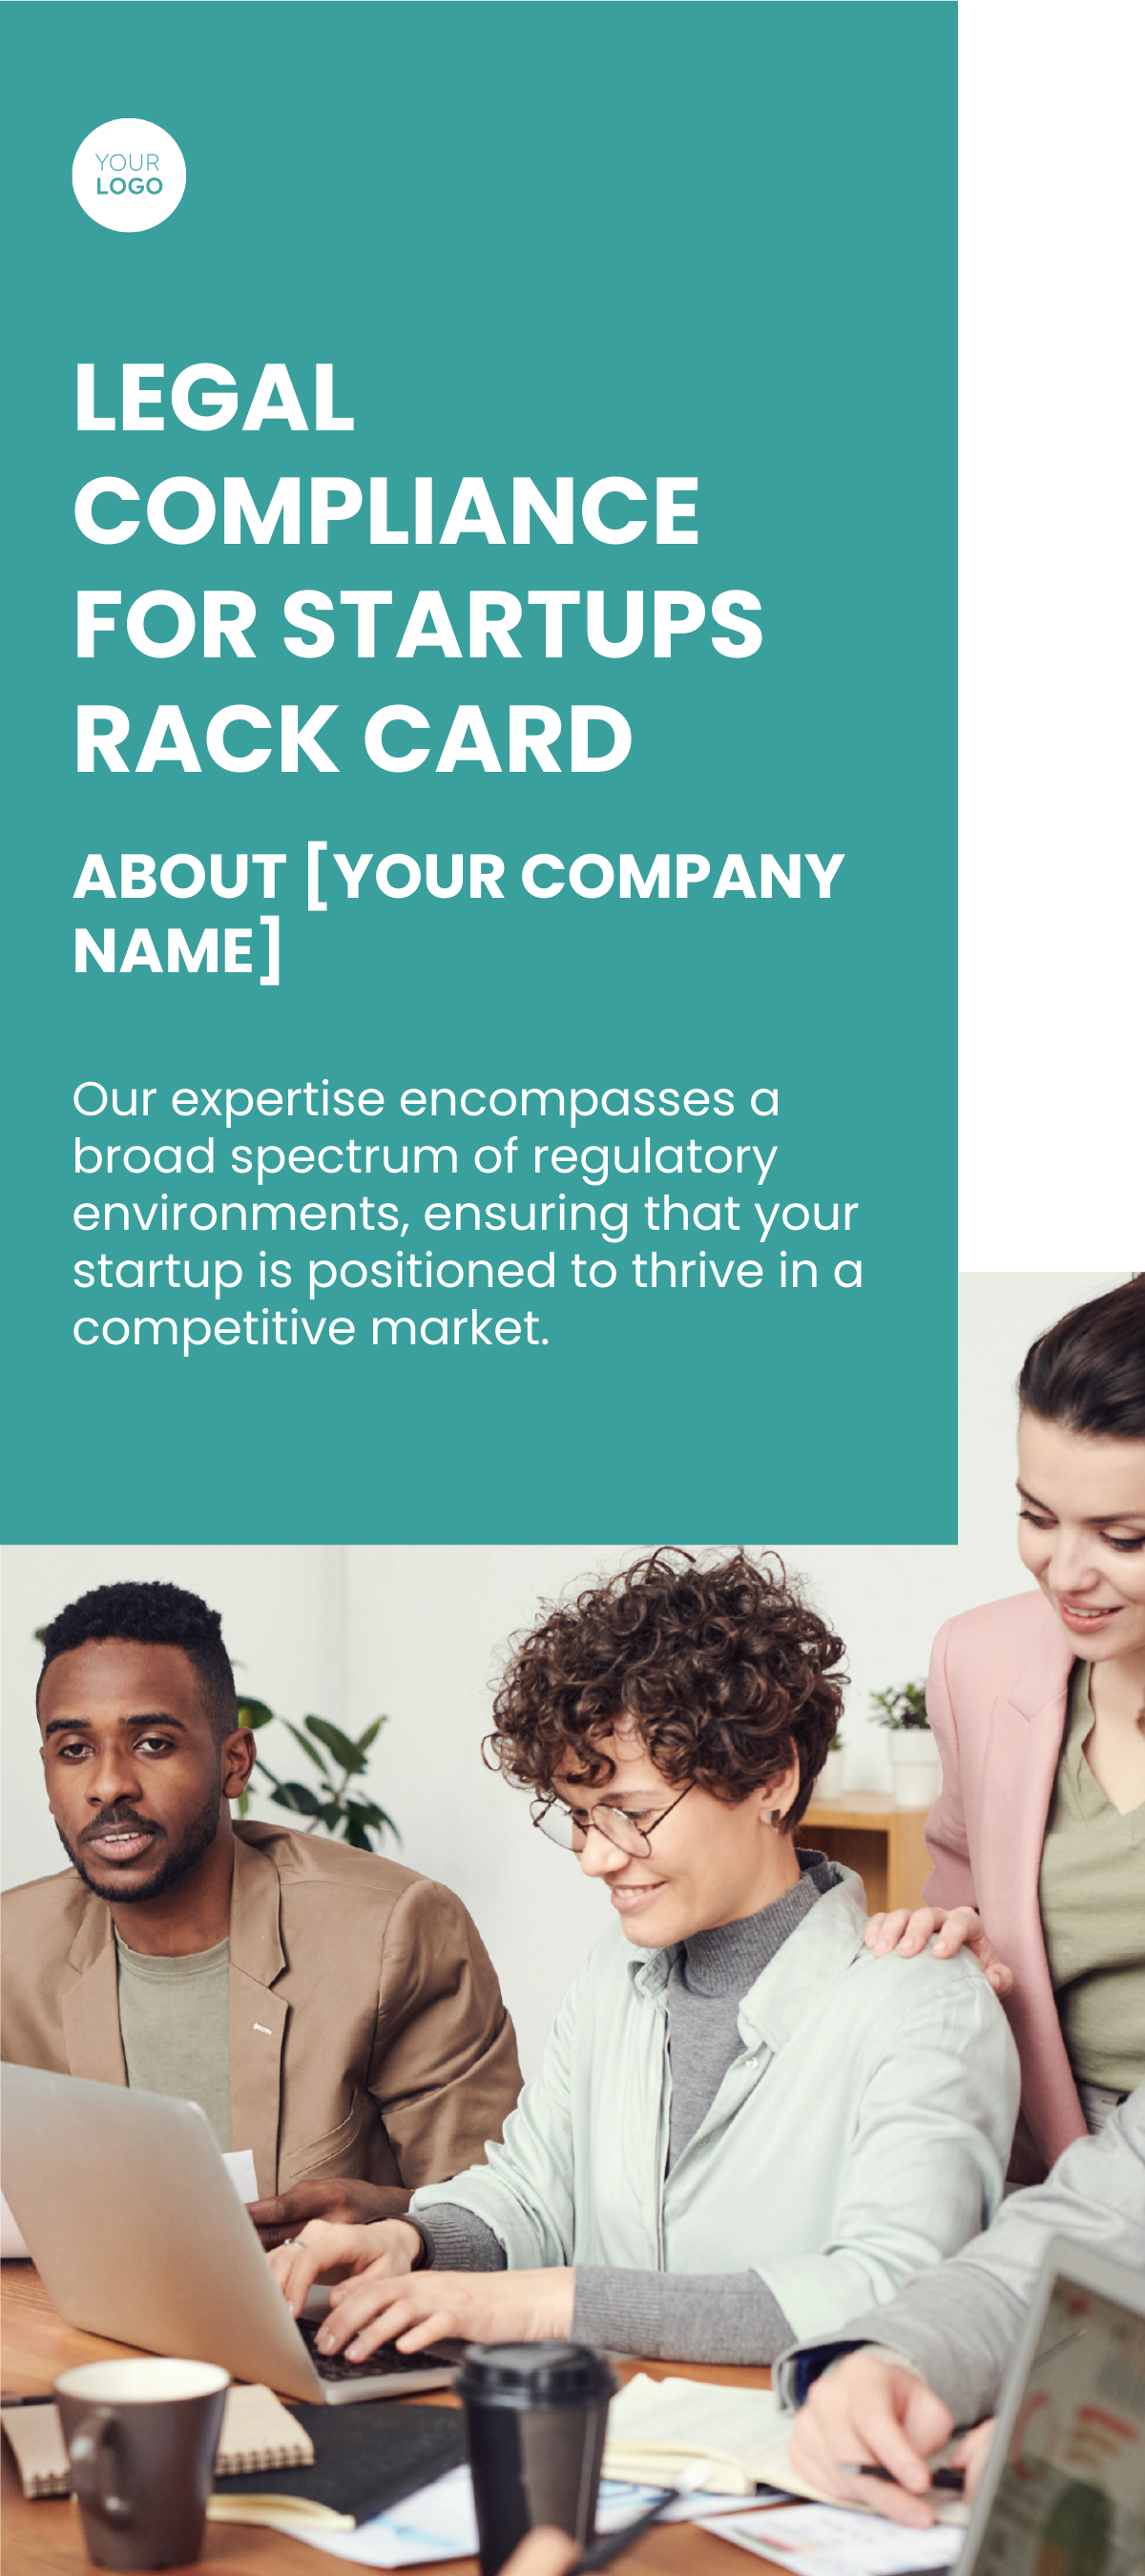 Legal Compliance for Startups Rack Card Template